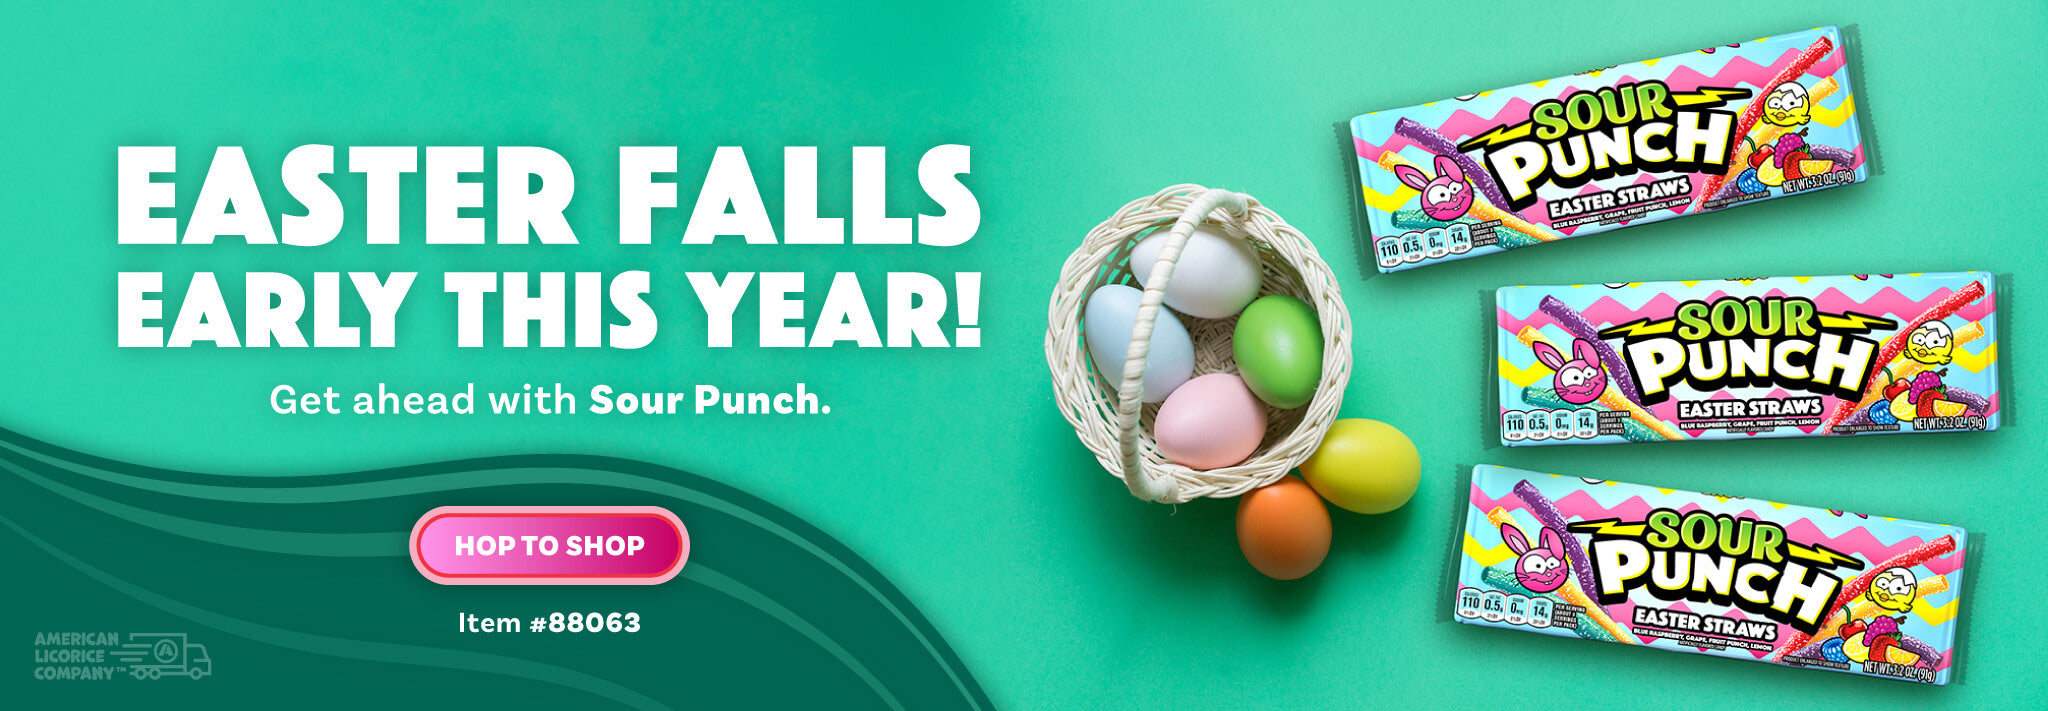 Easter falls early this year! Get ahead with Sour Punch Wholesale Easter Candy. Item #88063